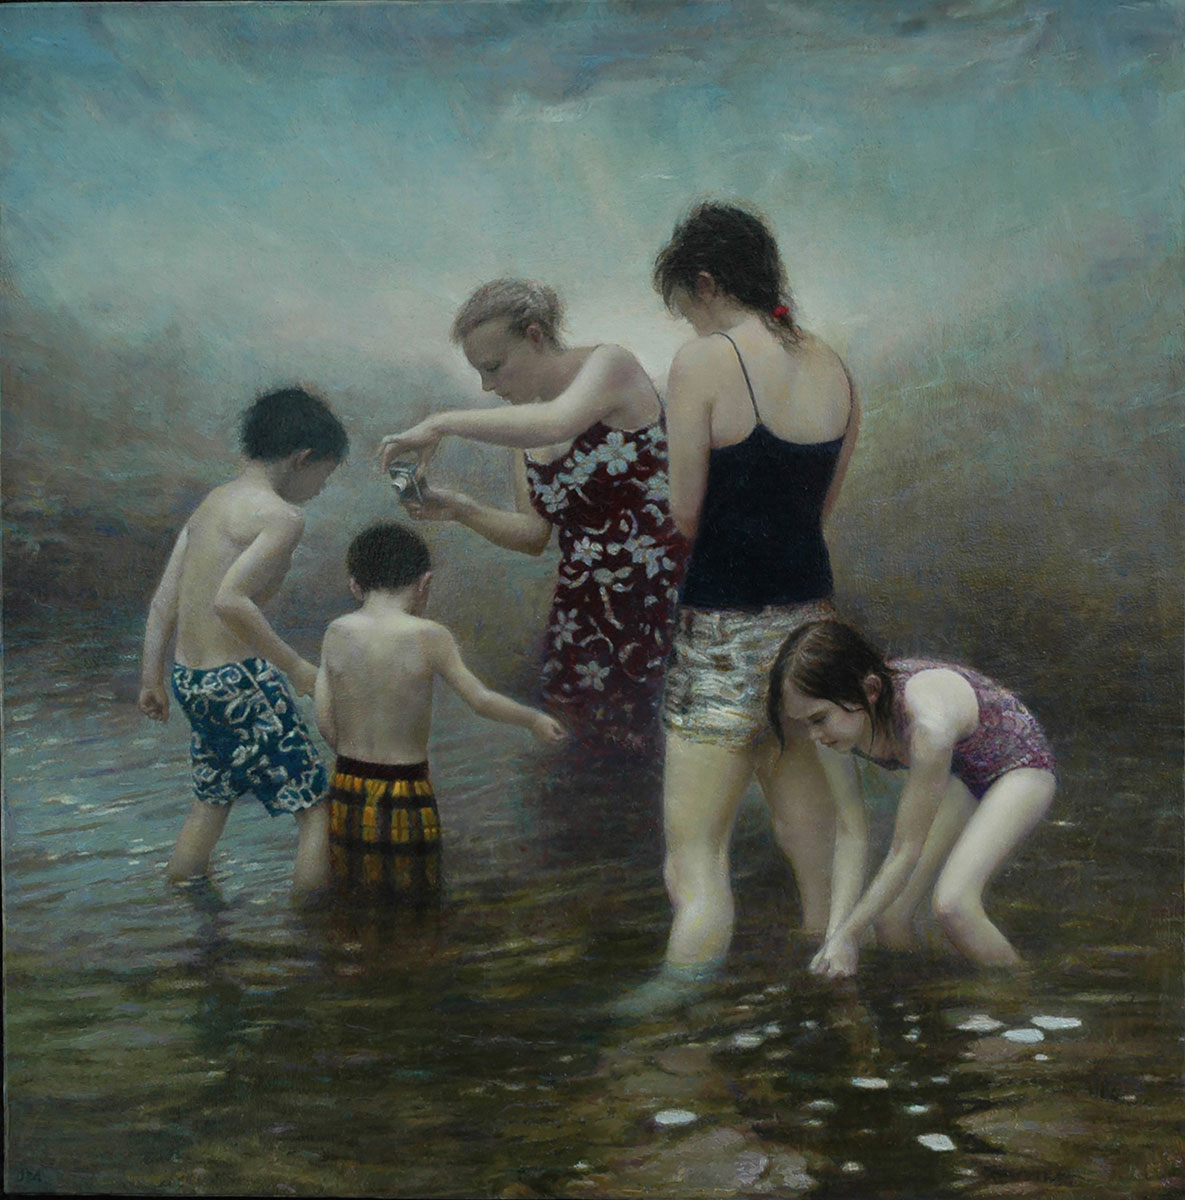 The Flood, painting by Joseph Miller